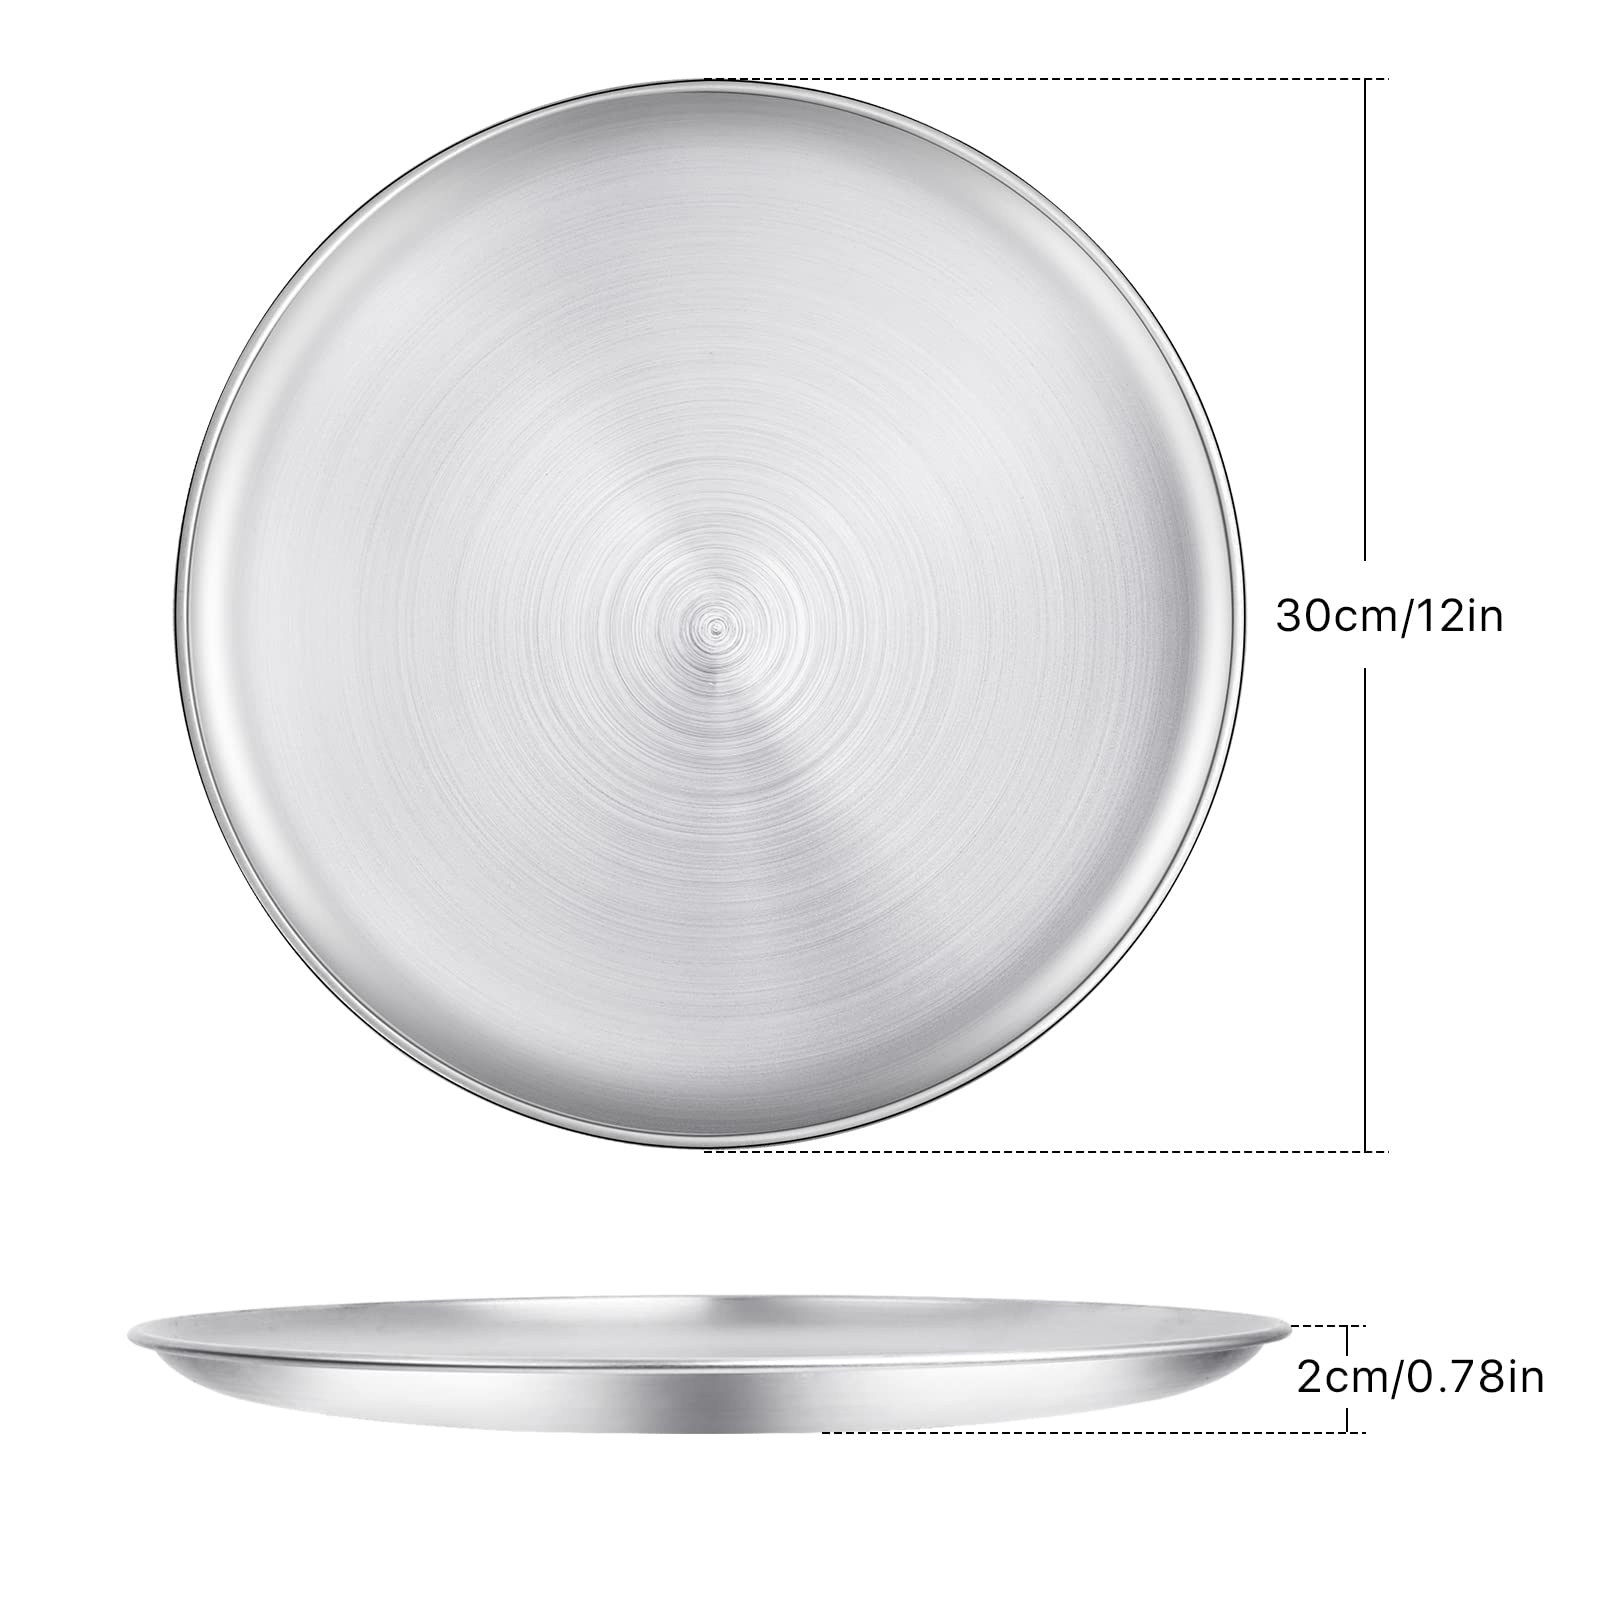 Worldity Pizza Serving Tray, 12 Inch Stainless Steel Pizza Pan, Food Grade Safe Pizza Pans, Round Pizza Tray for Oven, Pizza Plate for Pie, Cookie, Dishwasher Safe(4 Pack)